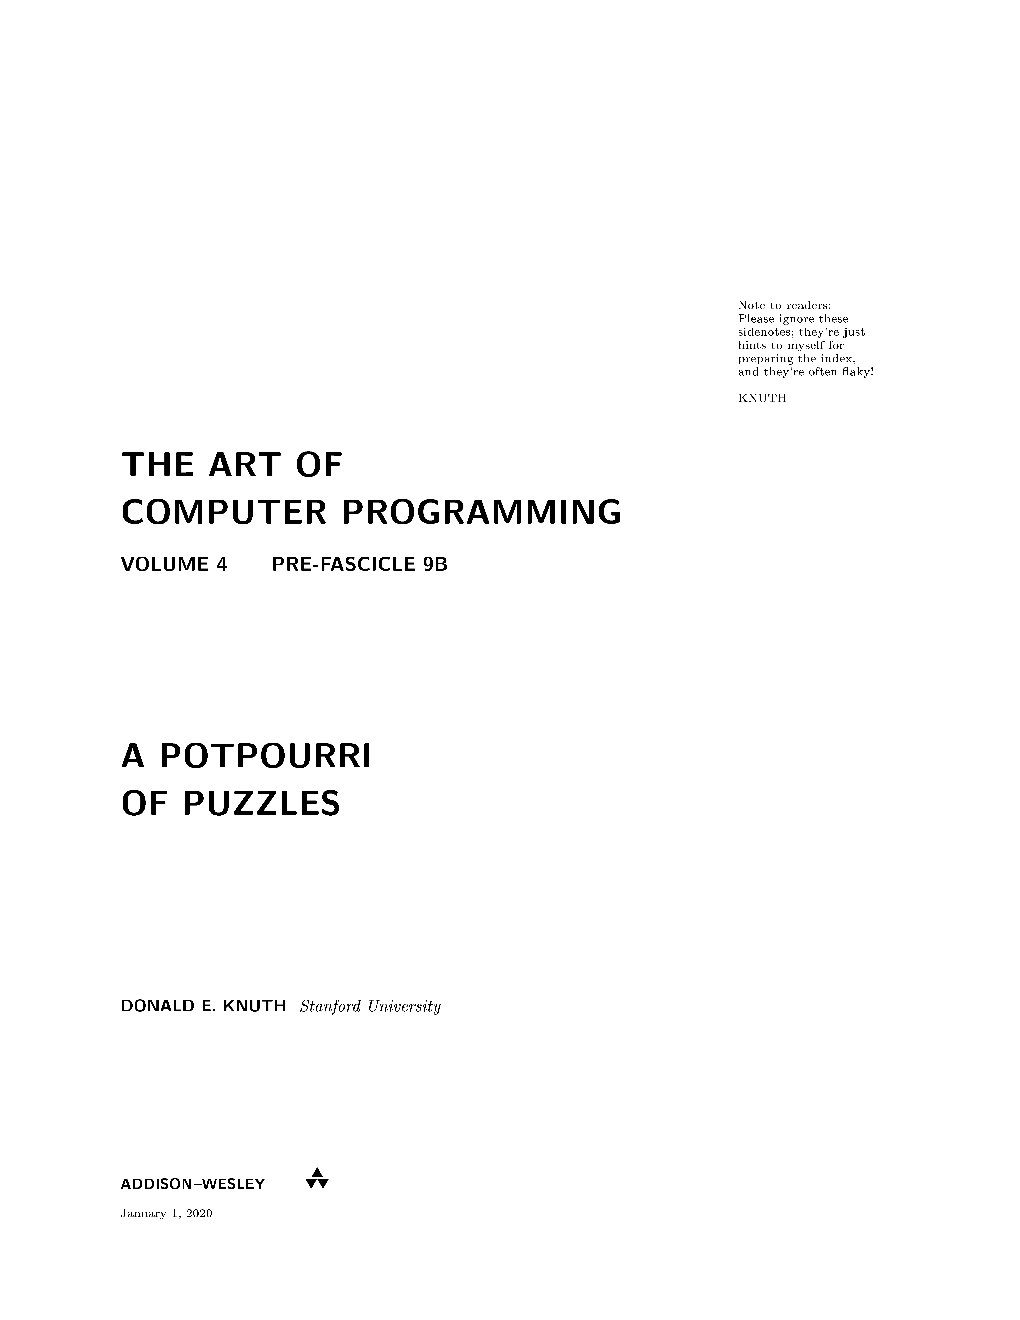 The Art of Computer Programming a Potpourri of Puzzles